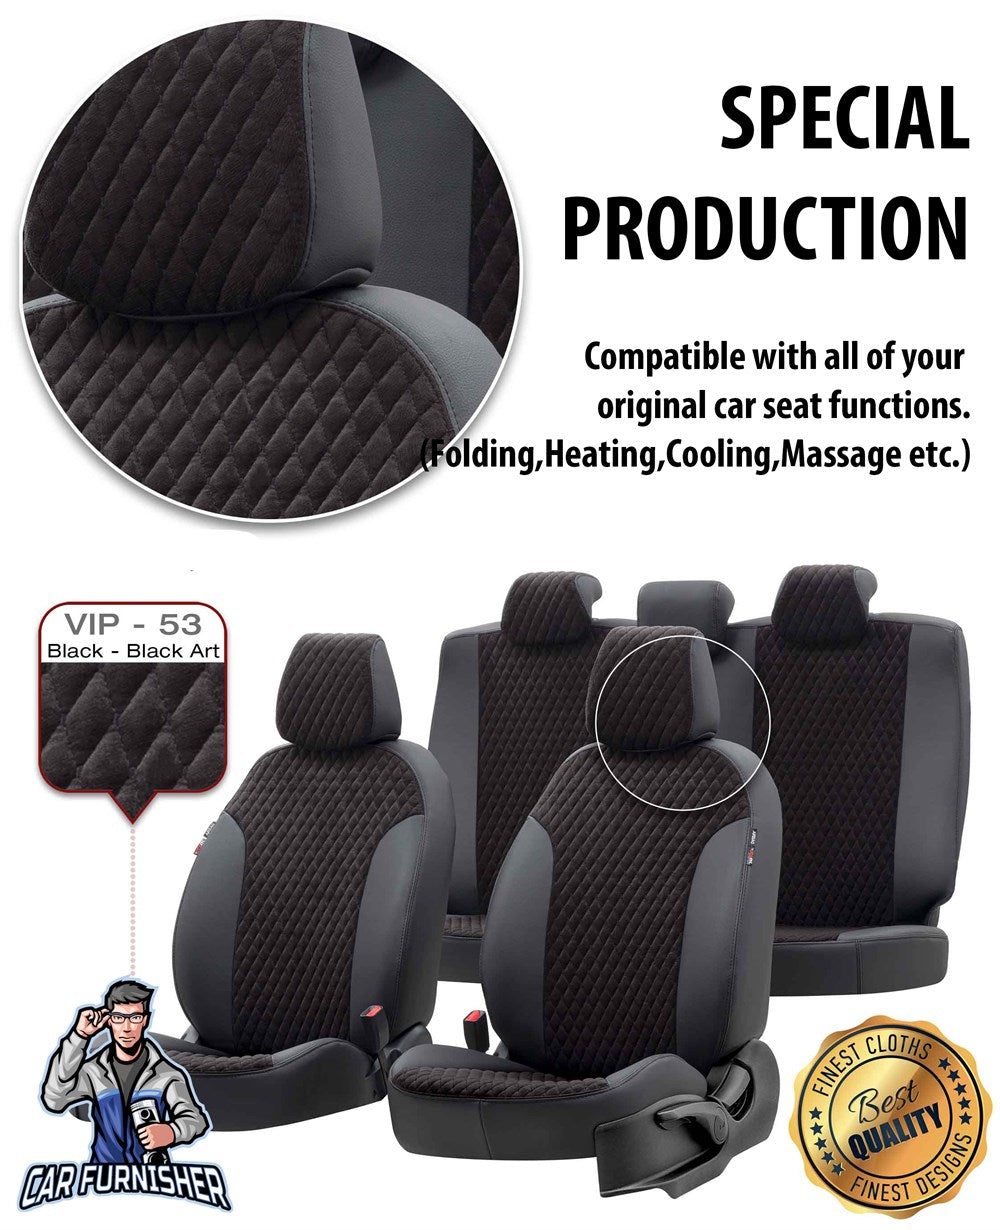 Tata Xenon Seat Covers Amsterdam Foal Feather Design Black Leather & Foal Feather